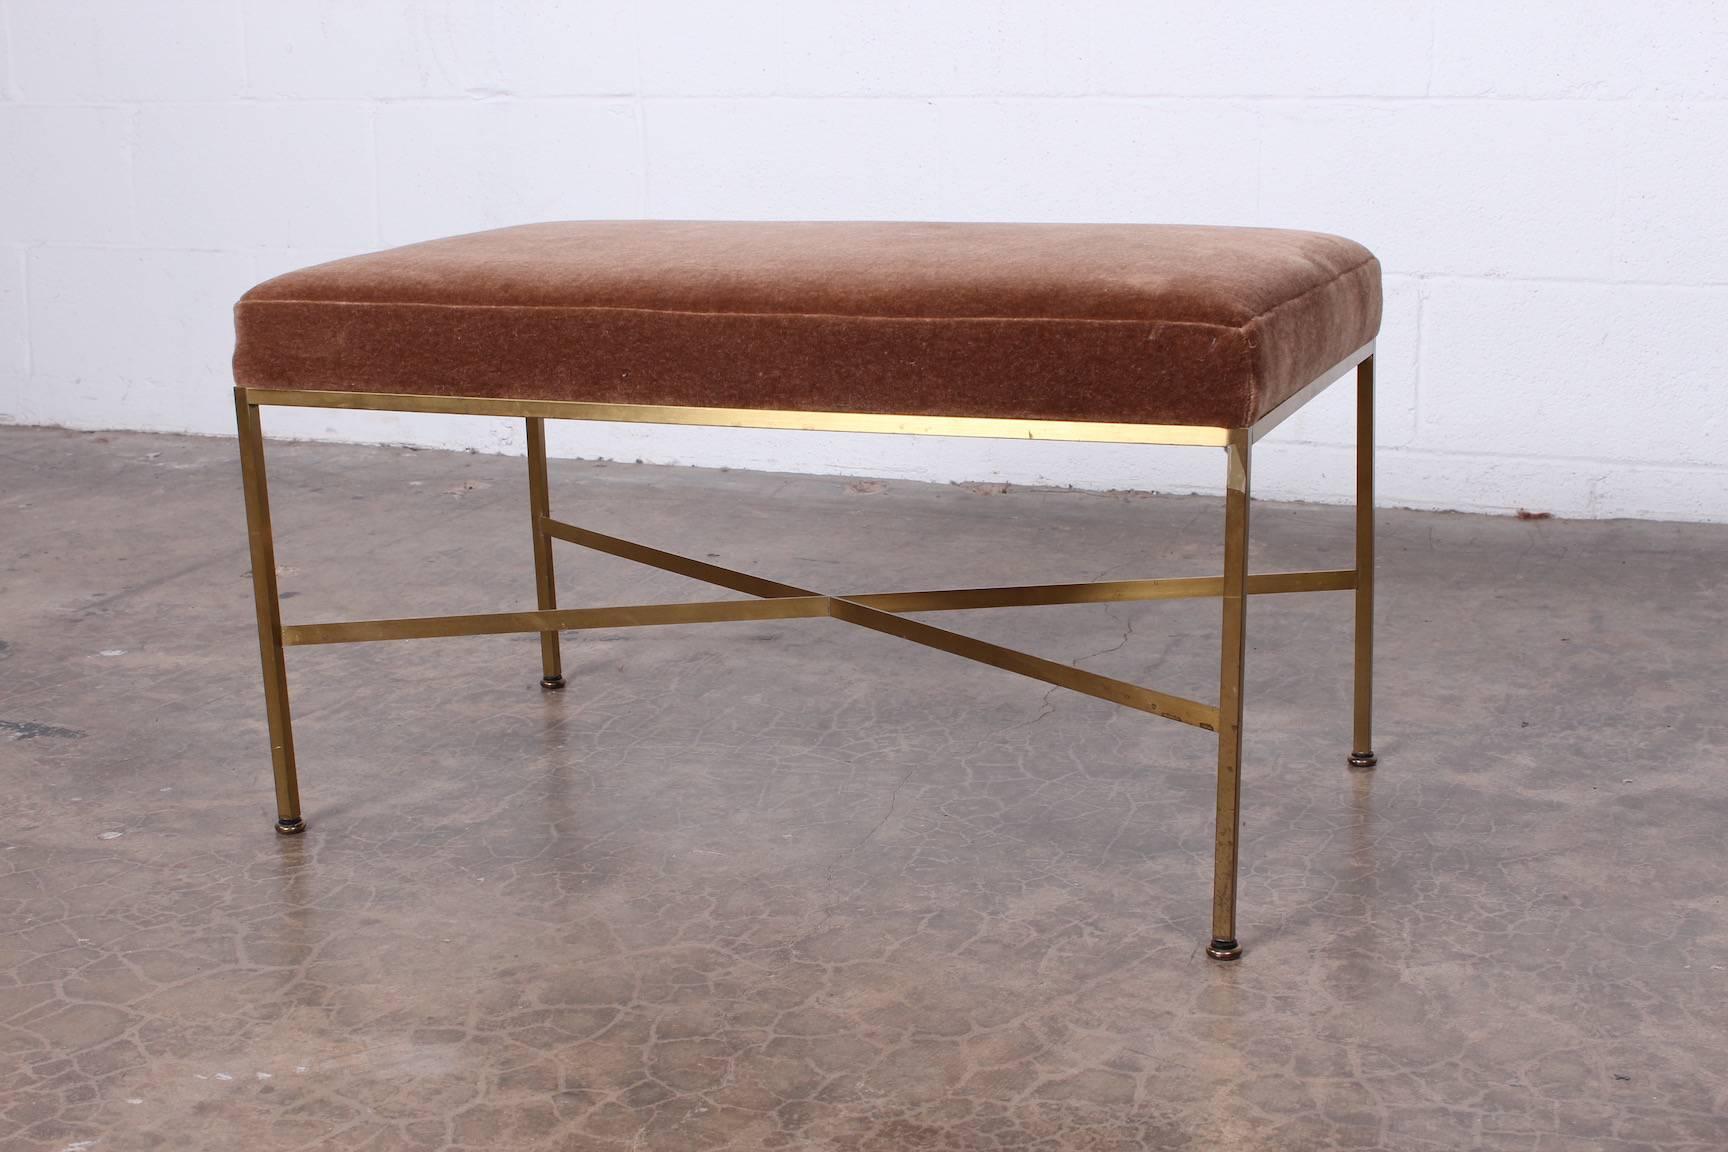 A brass and mohair X-base stool or bench designed by Paul McCobb for Calvin.